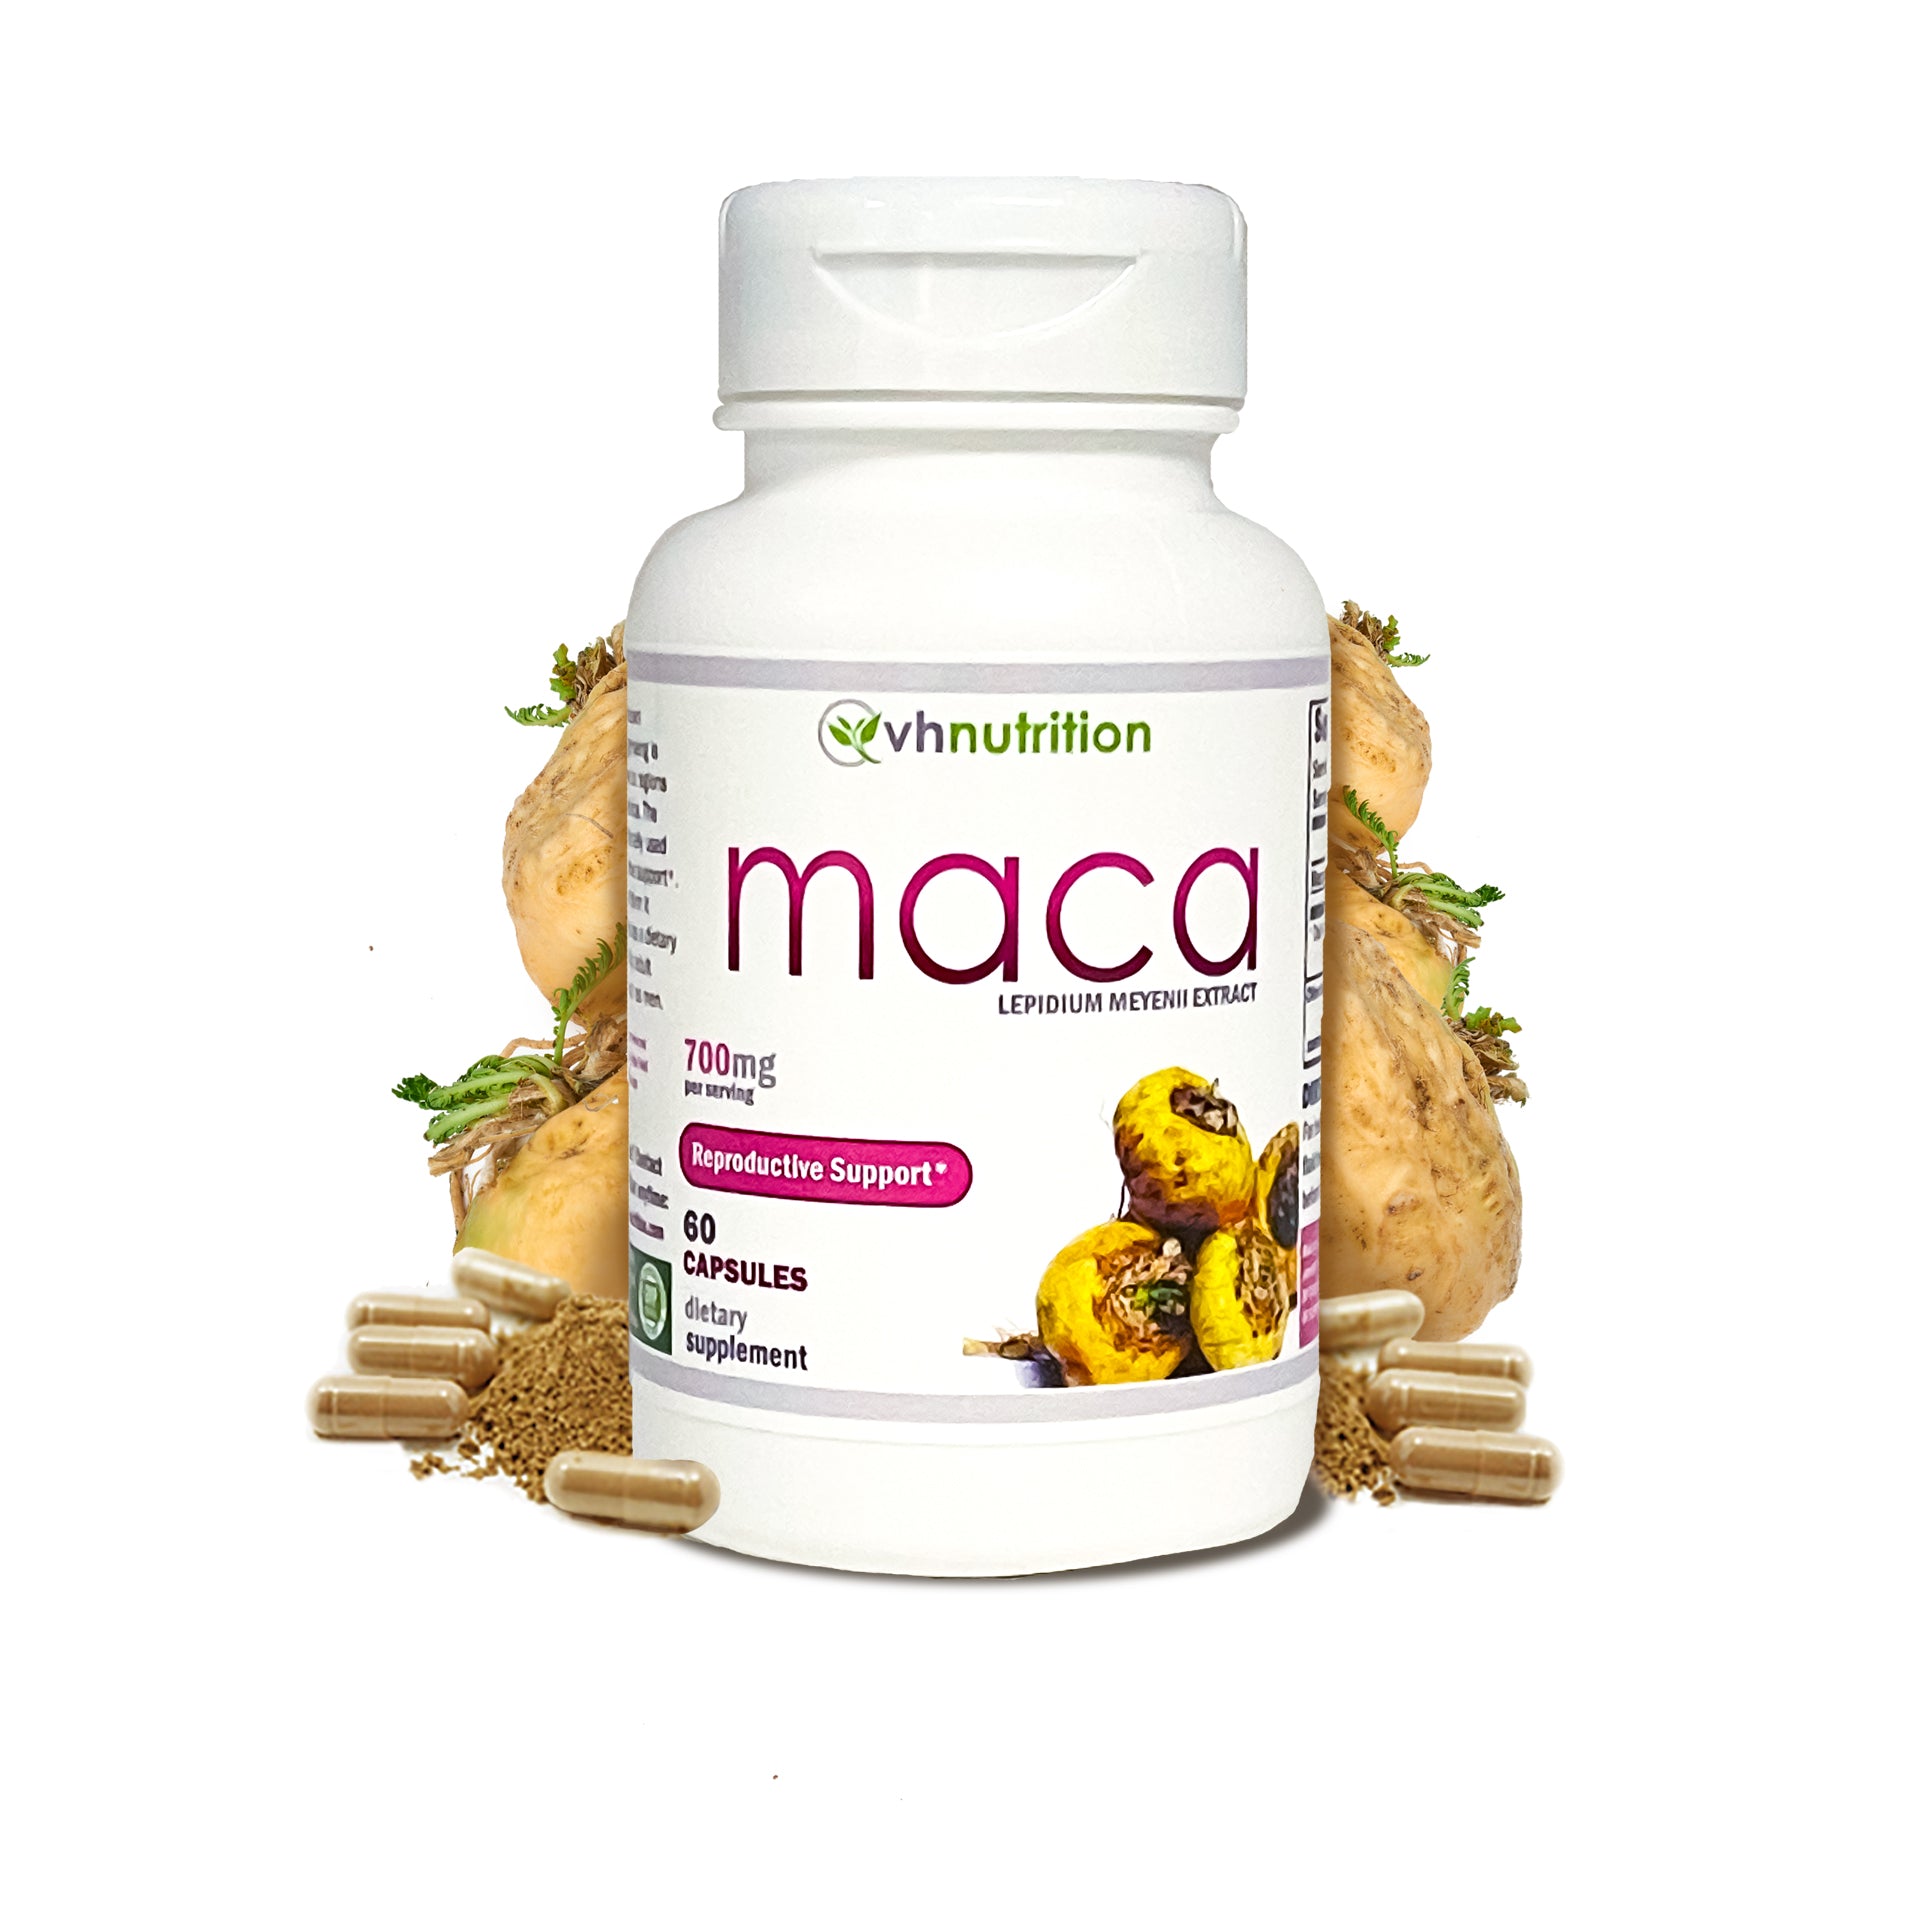 VH Nutrition MACA | Reproductive & Hormonal Support Supplement* | 700mg Per Serving | Standardized Lepidium Meyenii Extract Powder | 60 Capsules